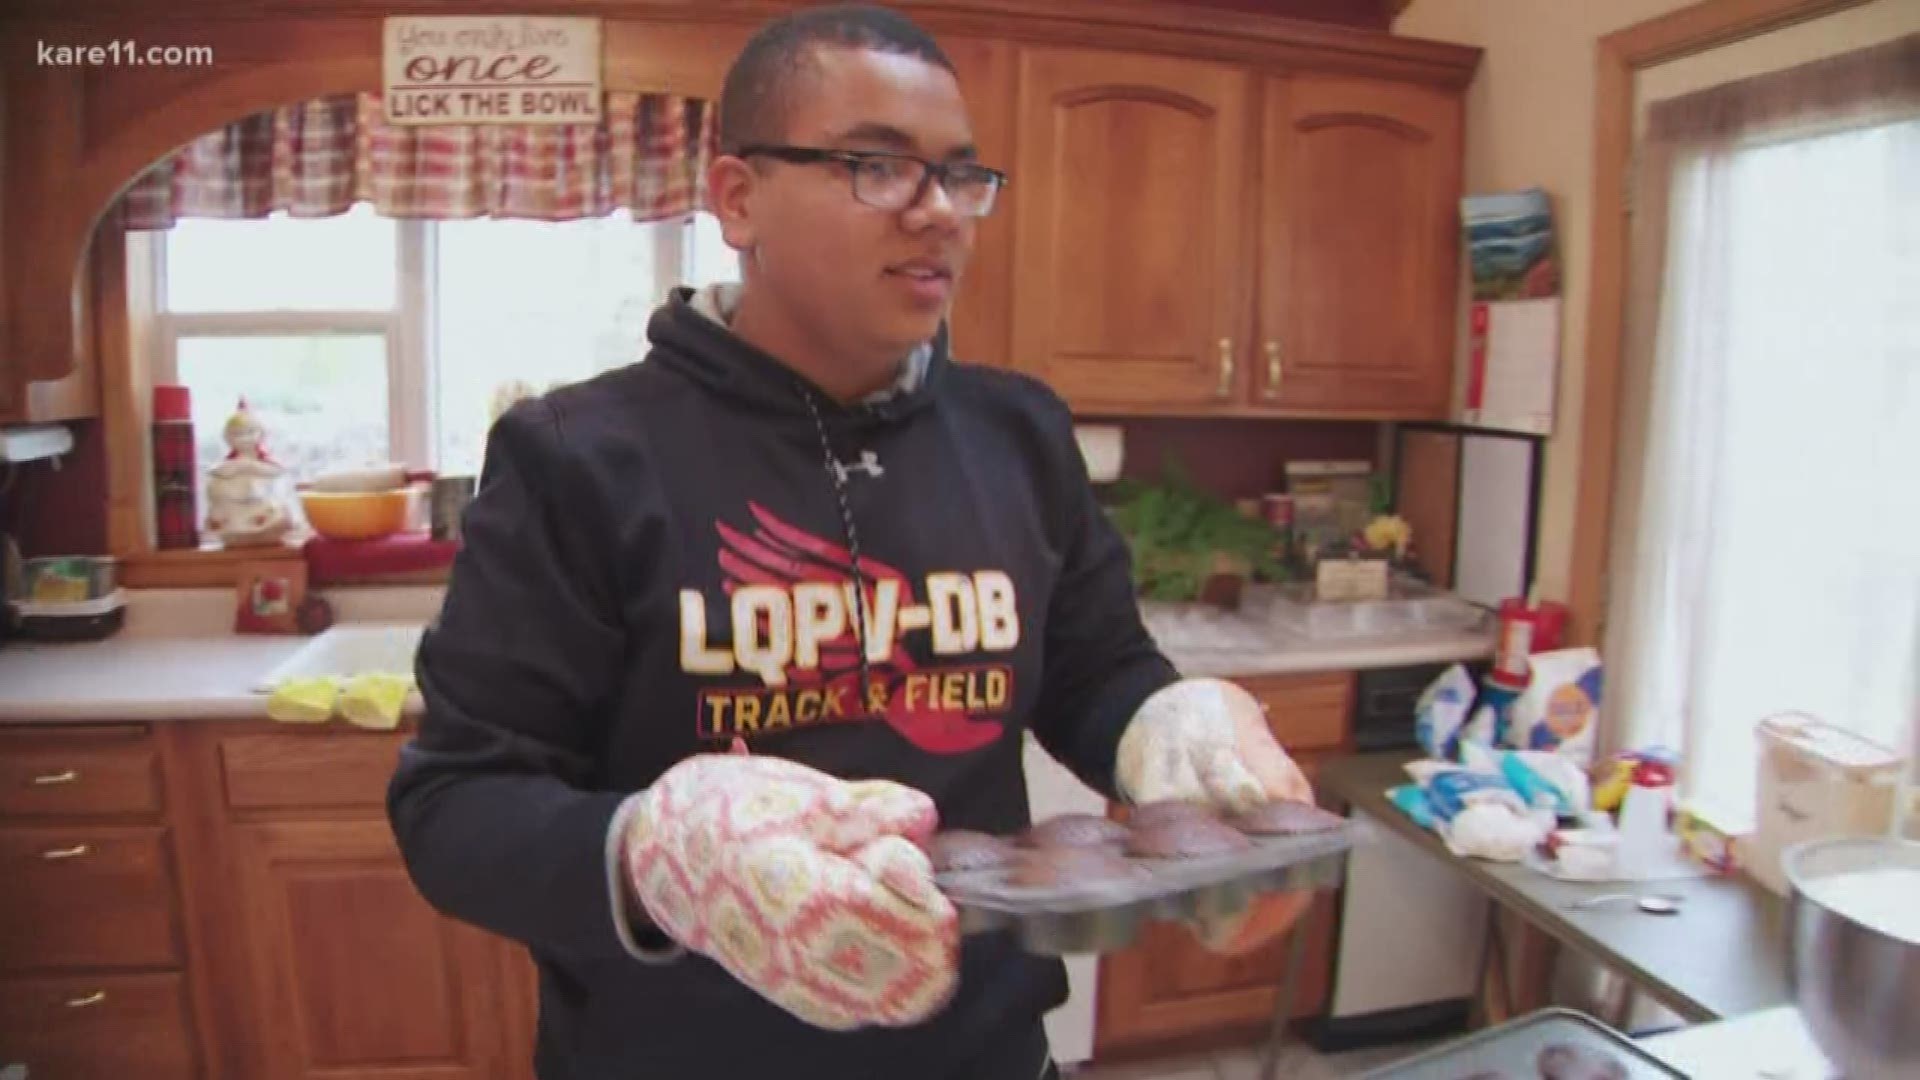 Minnesotan Isaiah Tuckett baked and sold thousands of cupcakes to achieve his dream